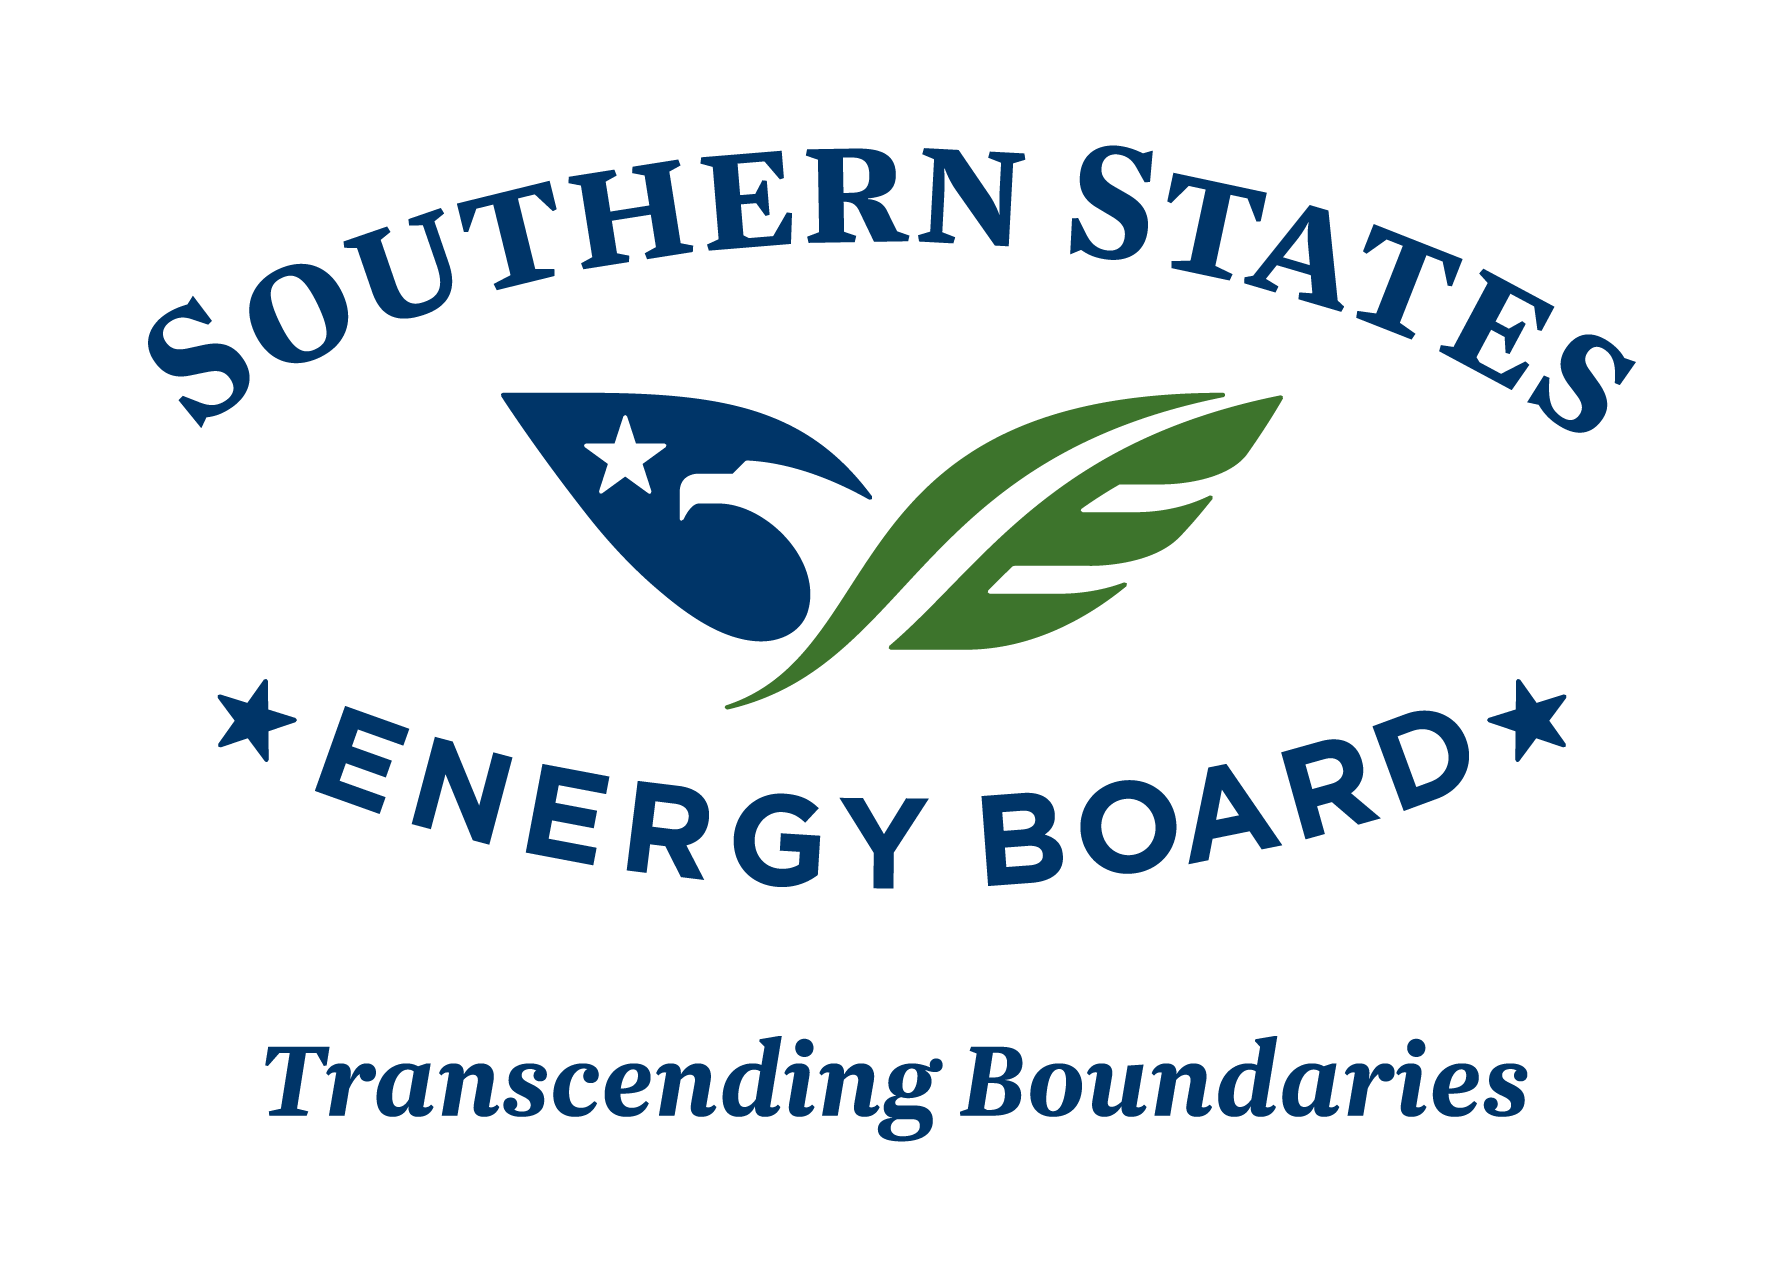 Transcending Boundaries. Southern States. States Energy MDCE. State energy